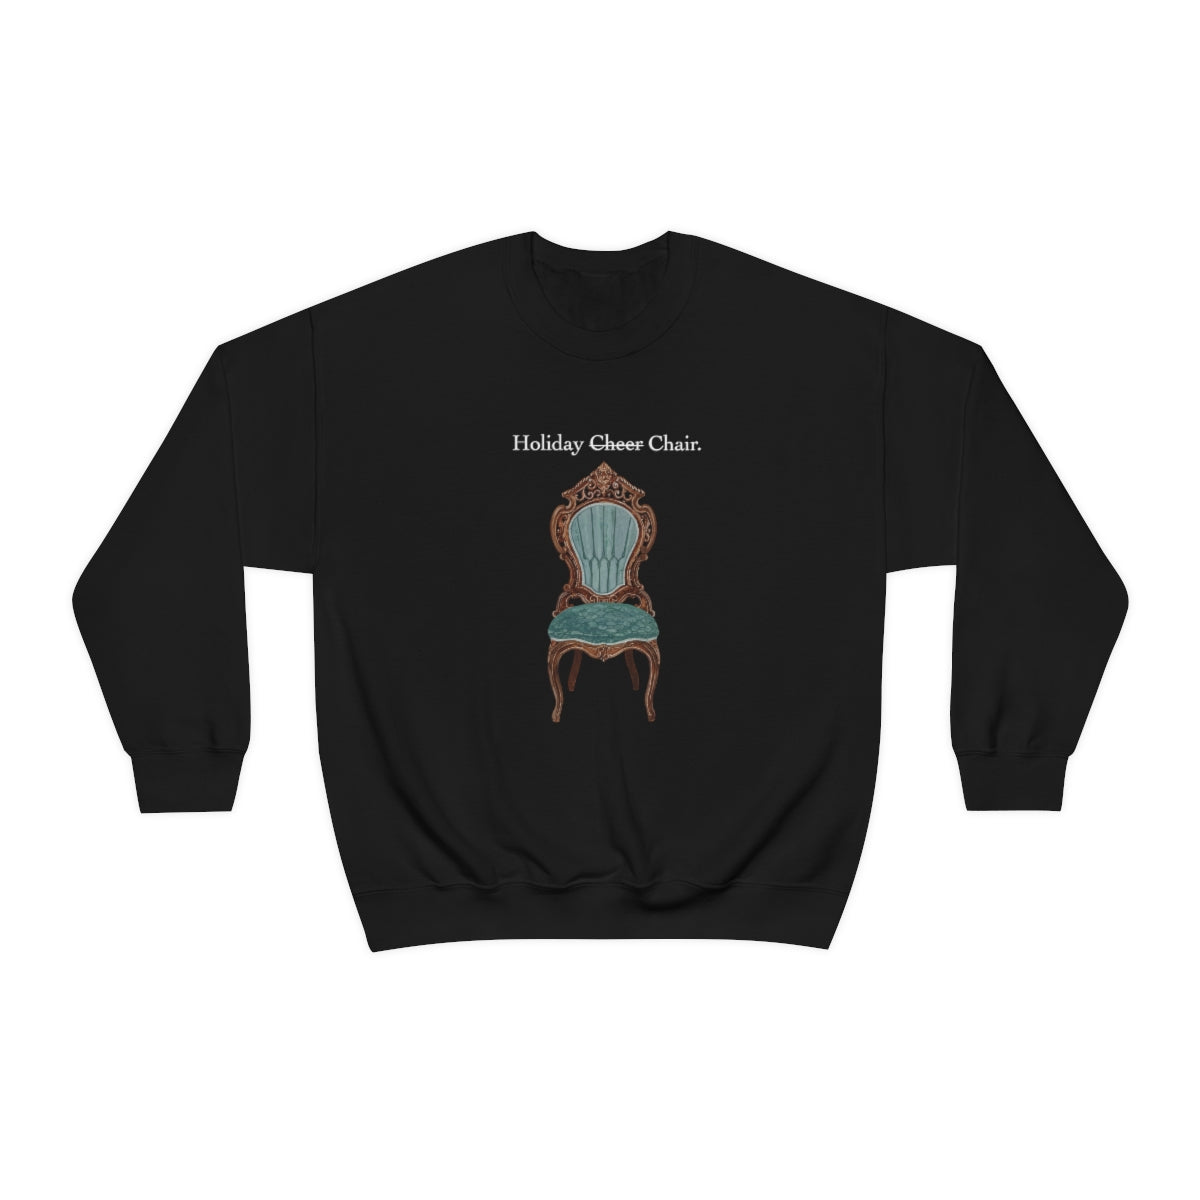 Sitmas Crewneck Sweatshirt | Christmas Gifts | Fun Christmas Products | Gifts for Him | Funny Gifts